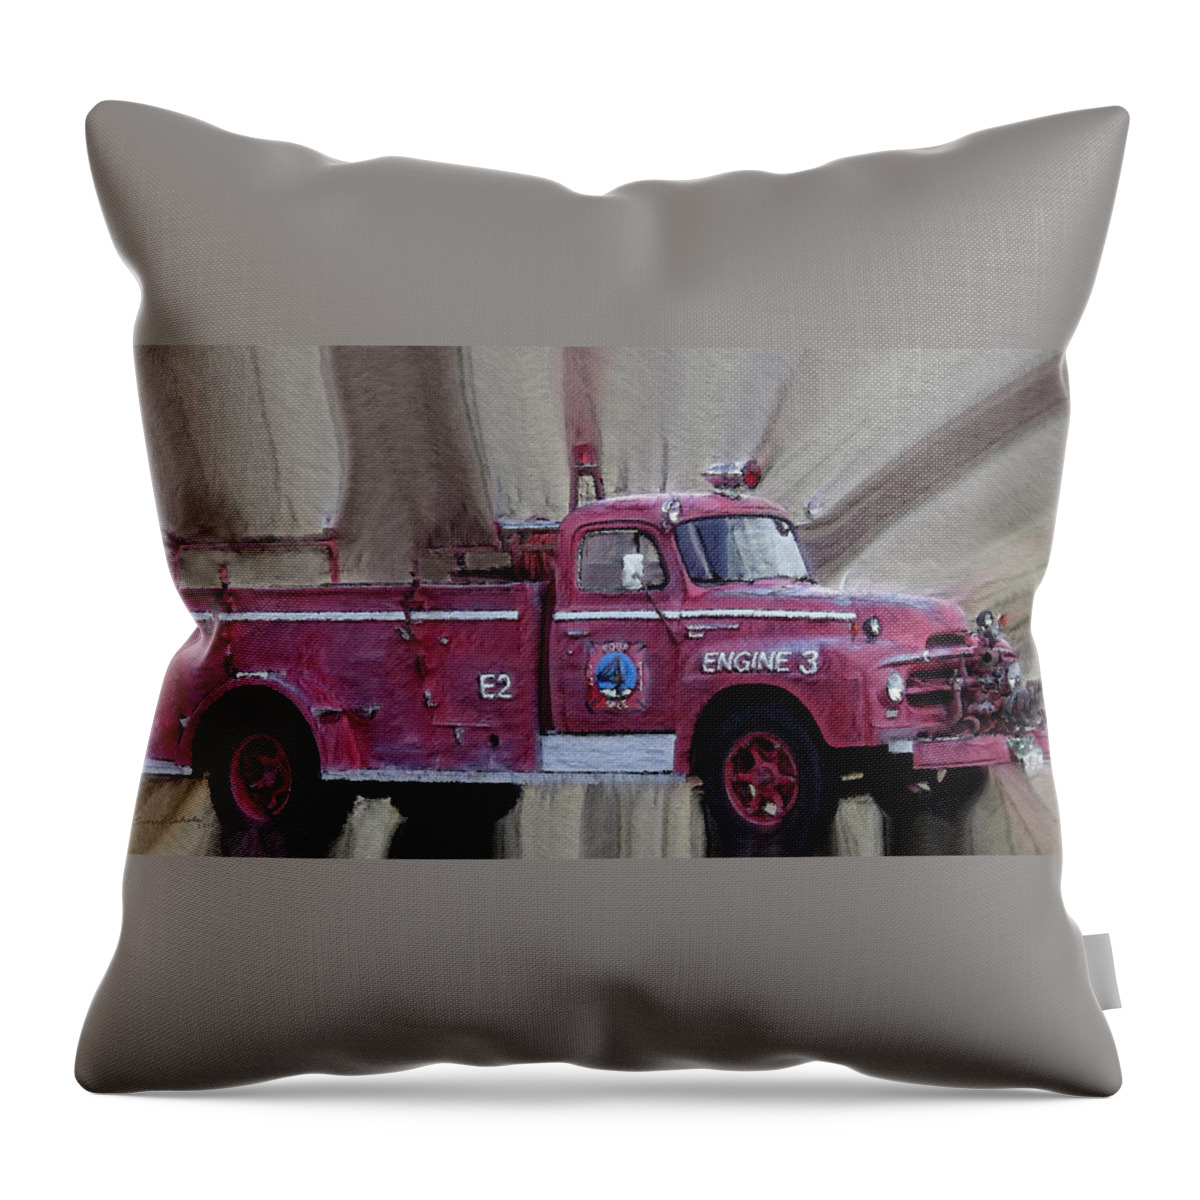 Fire Truck Throw Pillow featuring the photograph Engine 3 by Ernest Echols